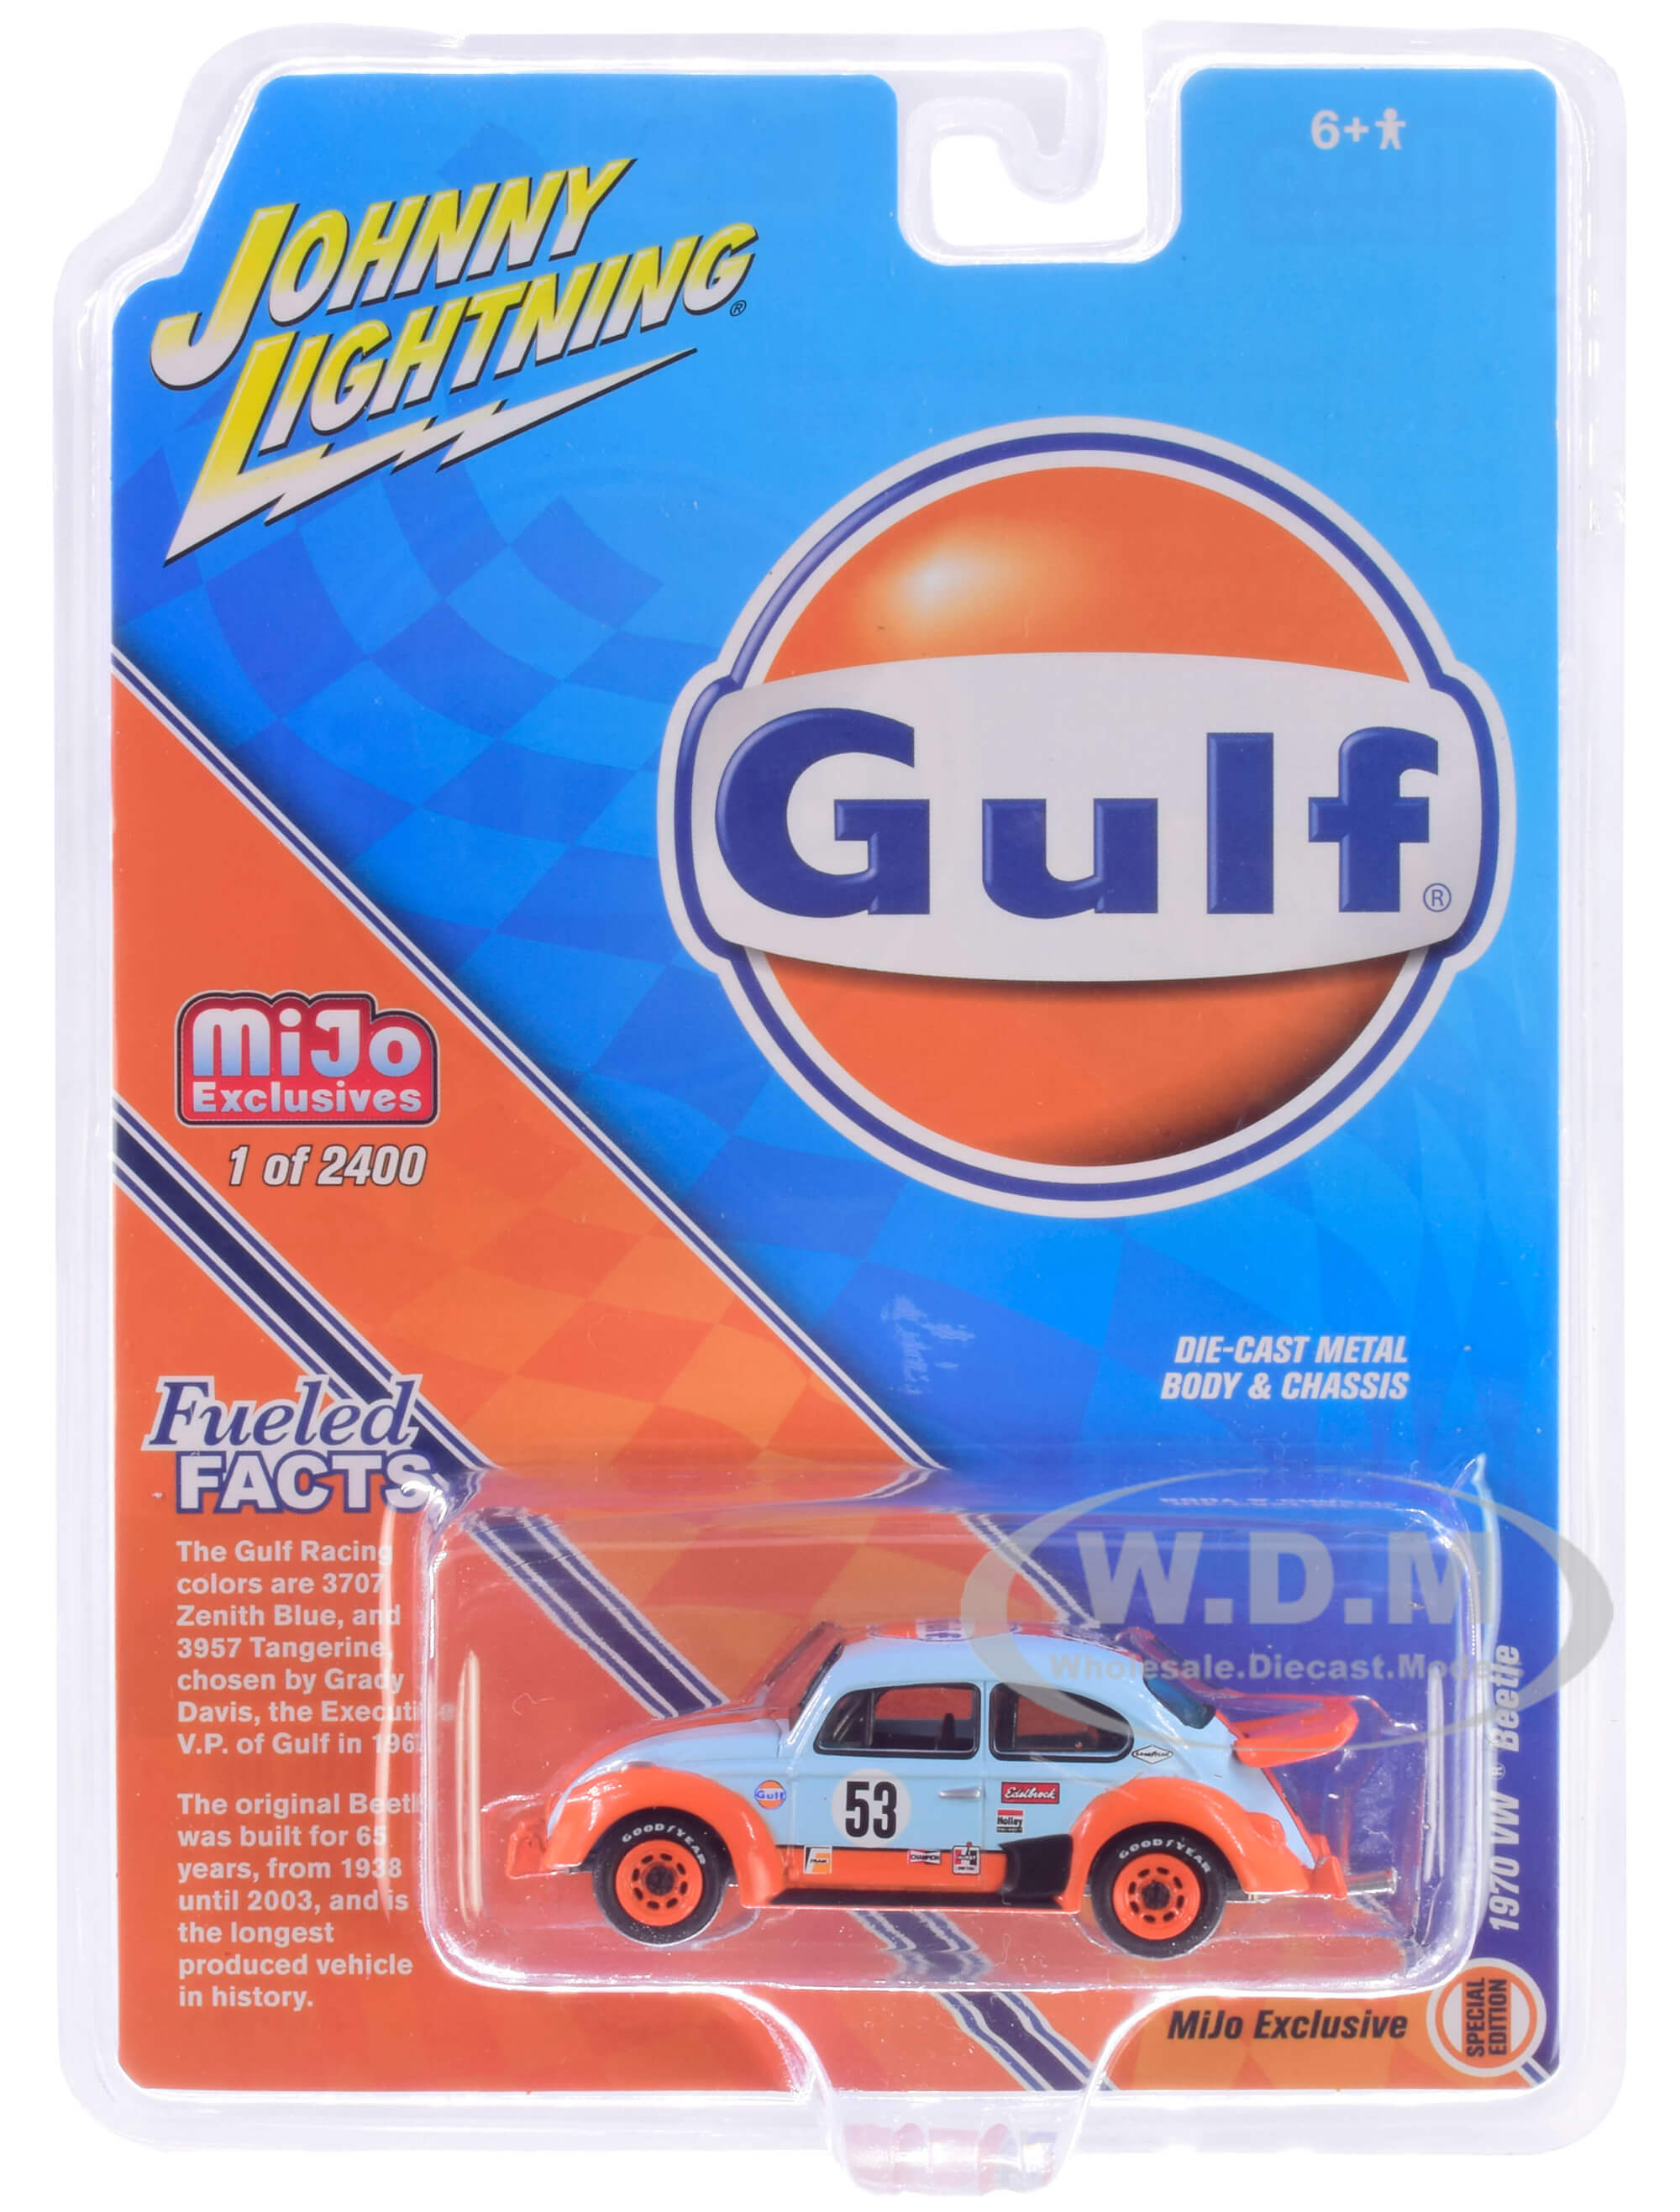 1970 Volkswagen Beetle Racing 53 "gulf Oil" Limited Edition To 2400 Pieces Worldwide 1/64 Diecast Model Car By Johnny Lightning